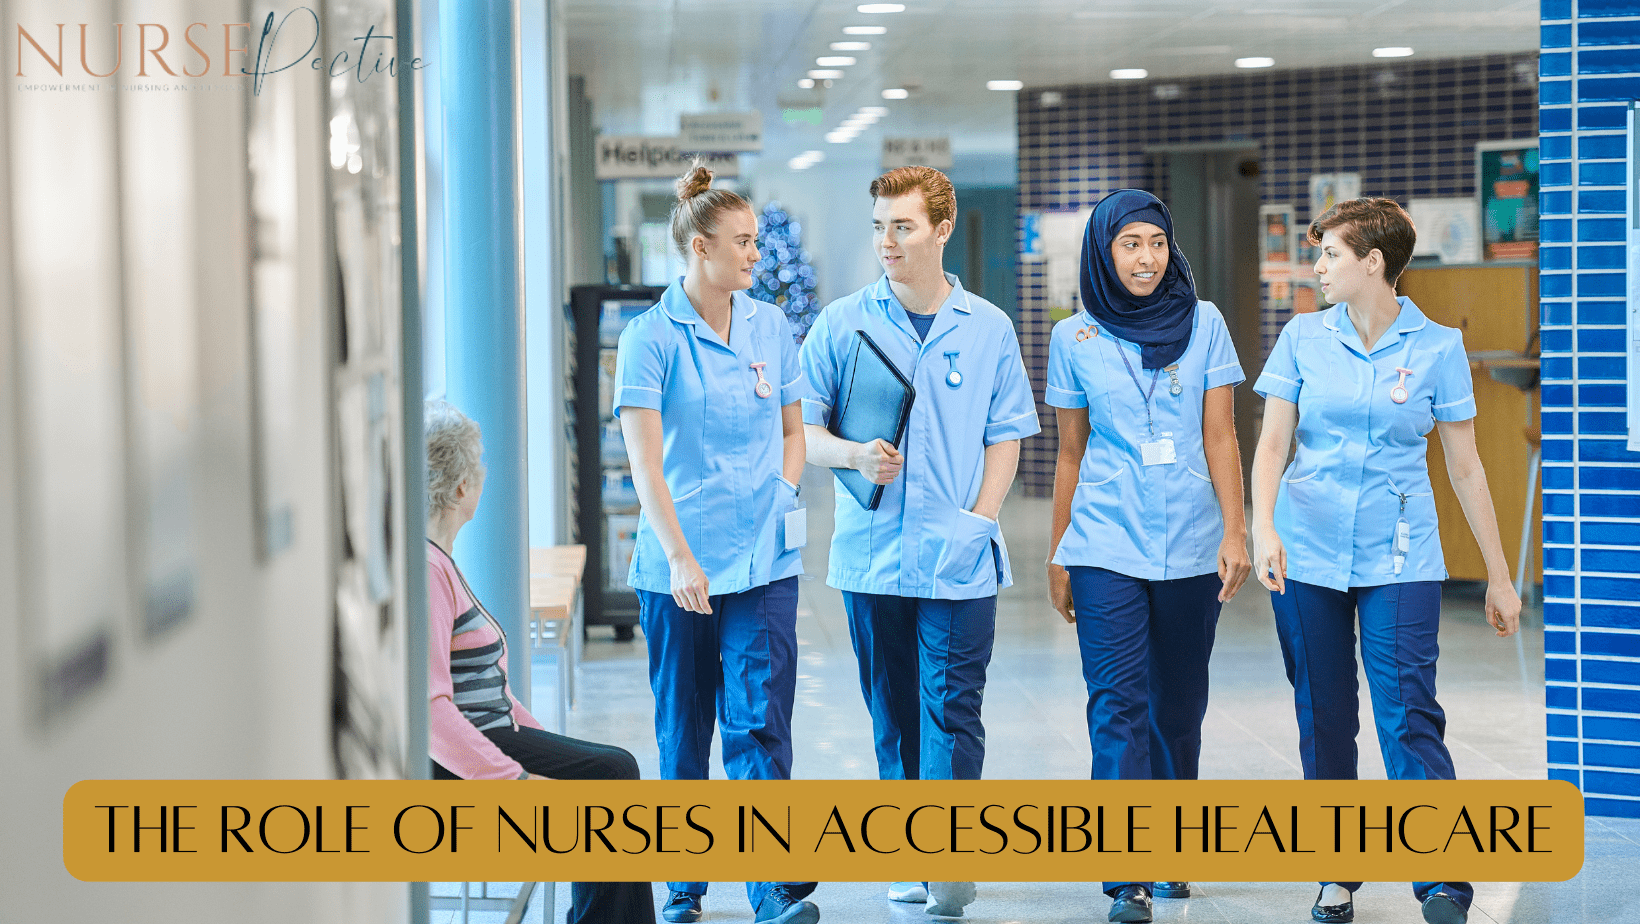 The Role of Nurses in Accessible Healthcare